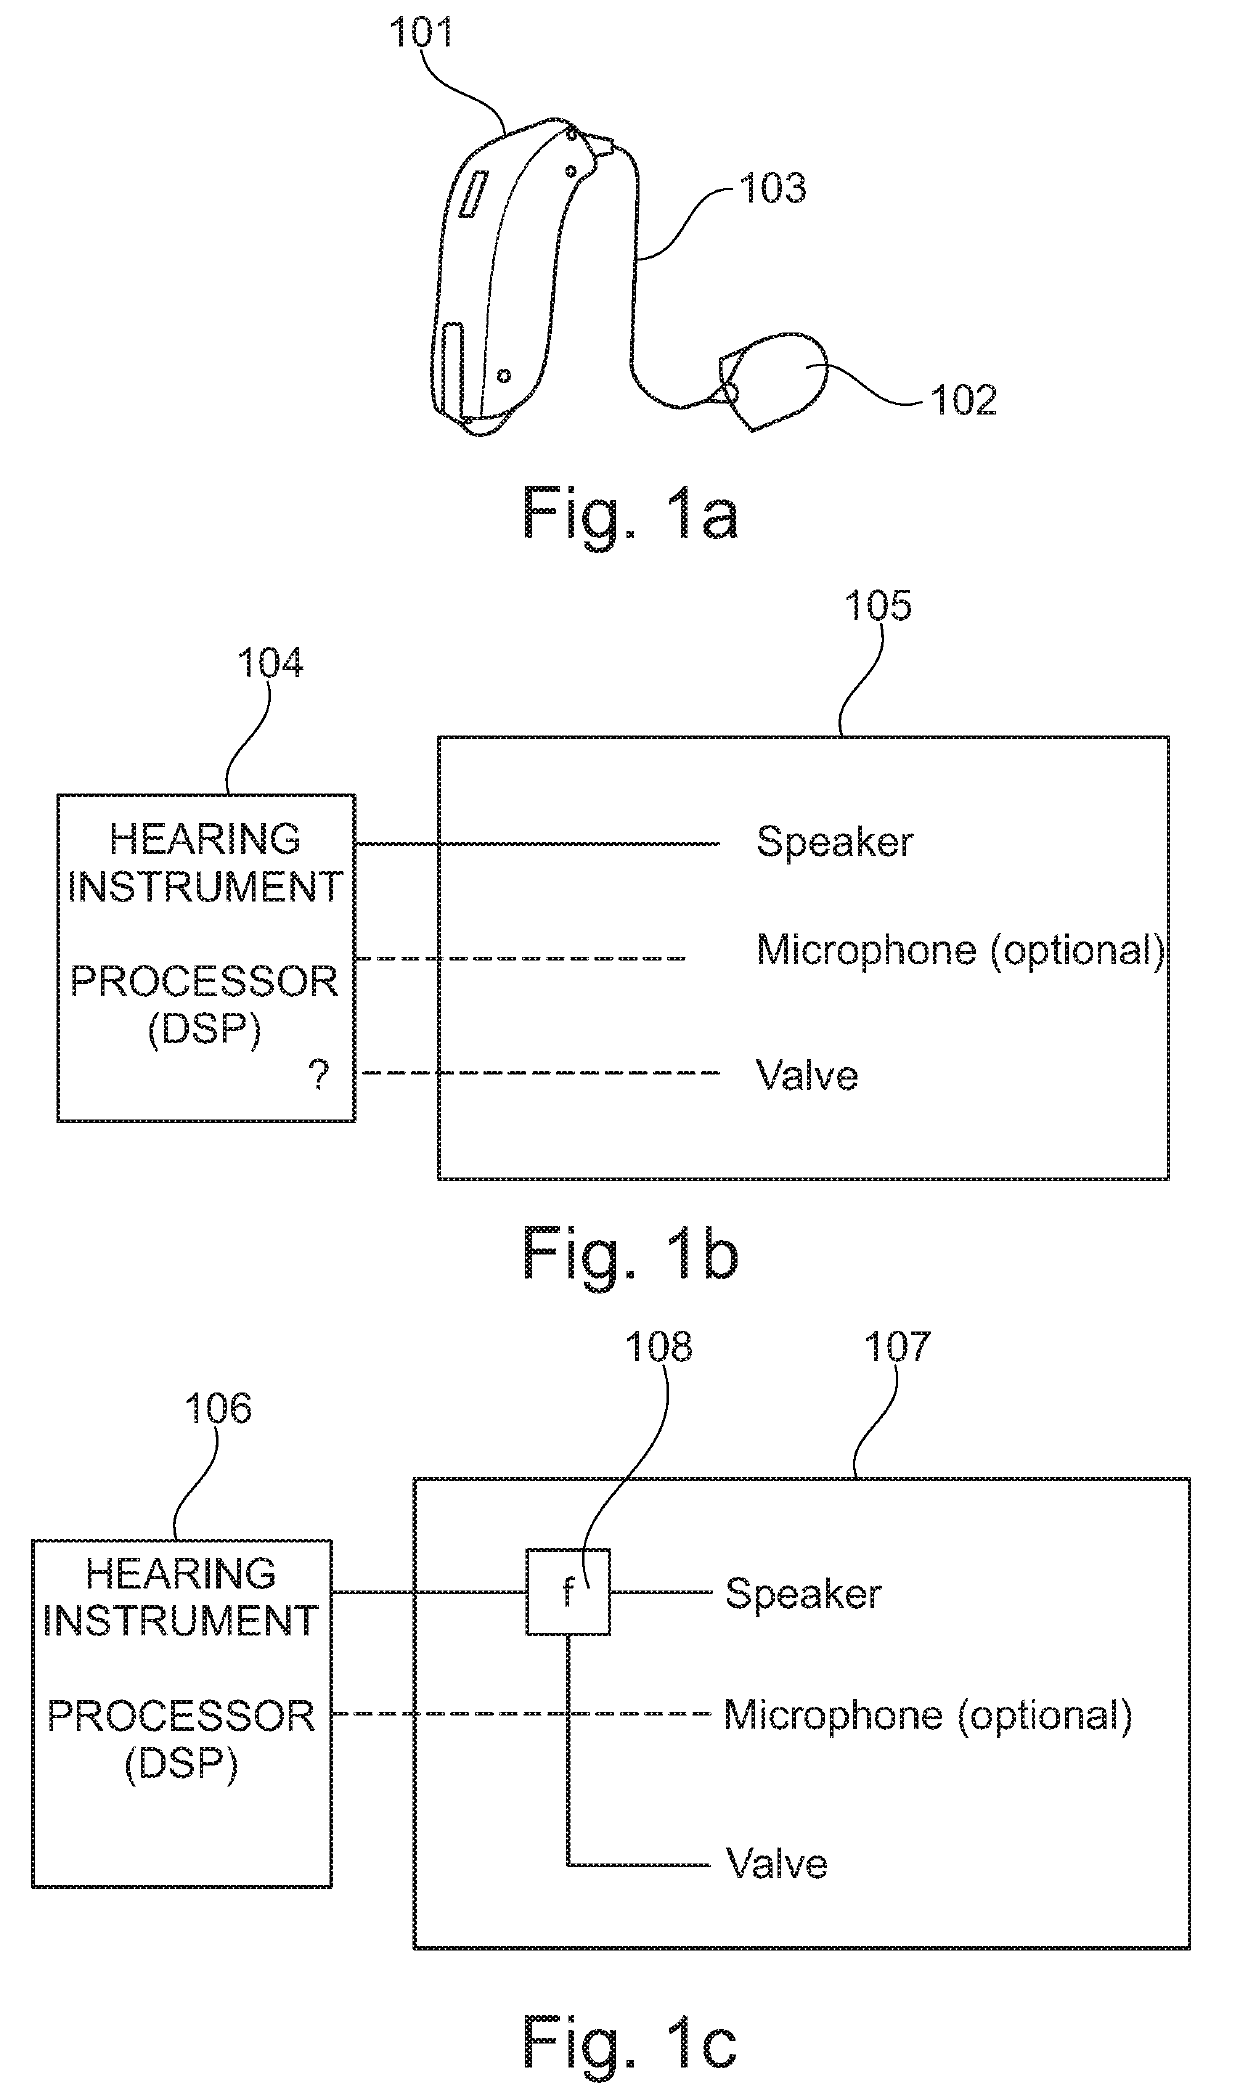 Electronic circuit and in-ear piece for a hearing device